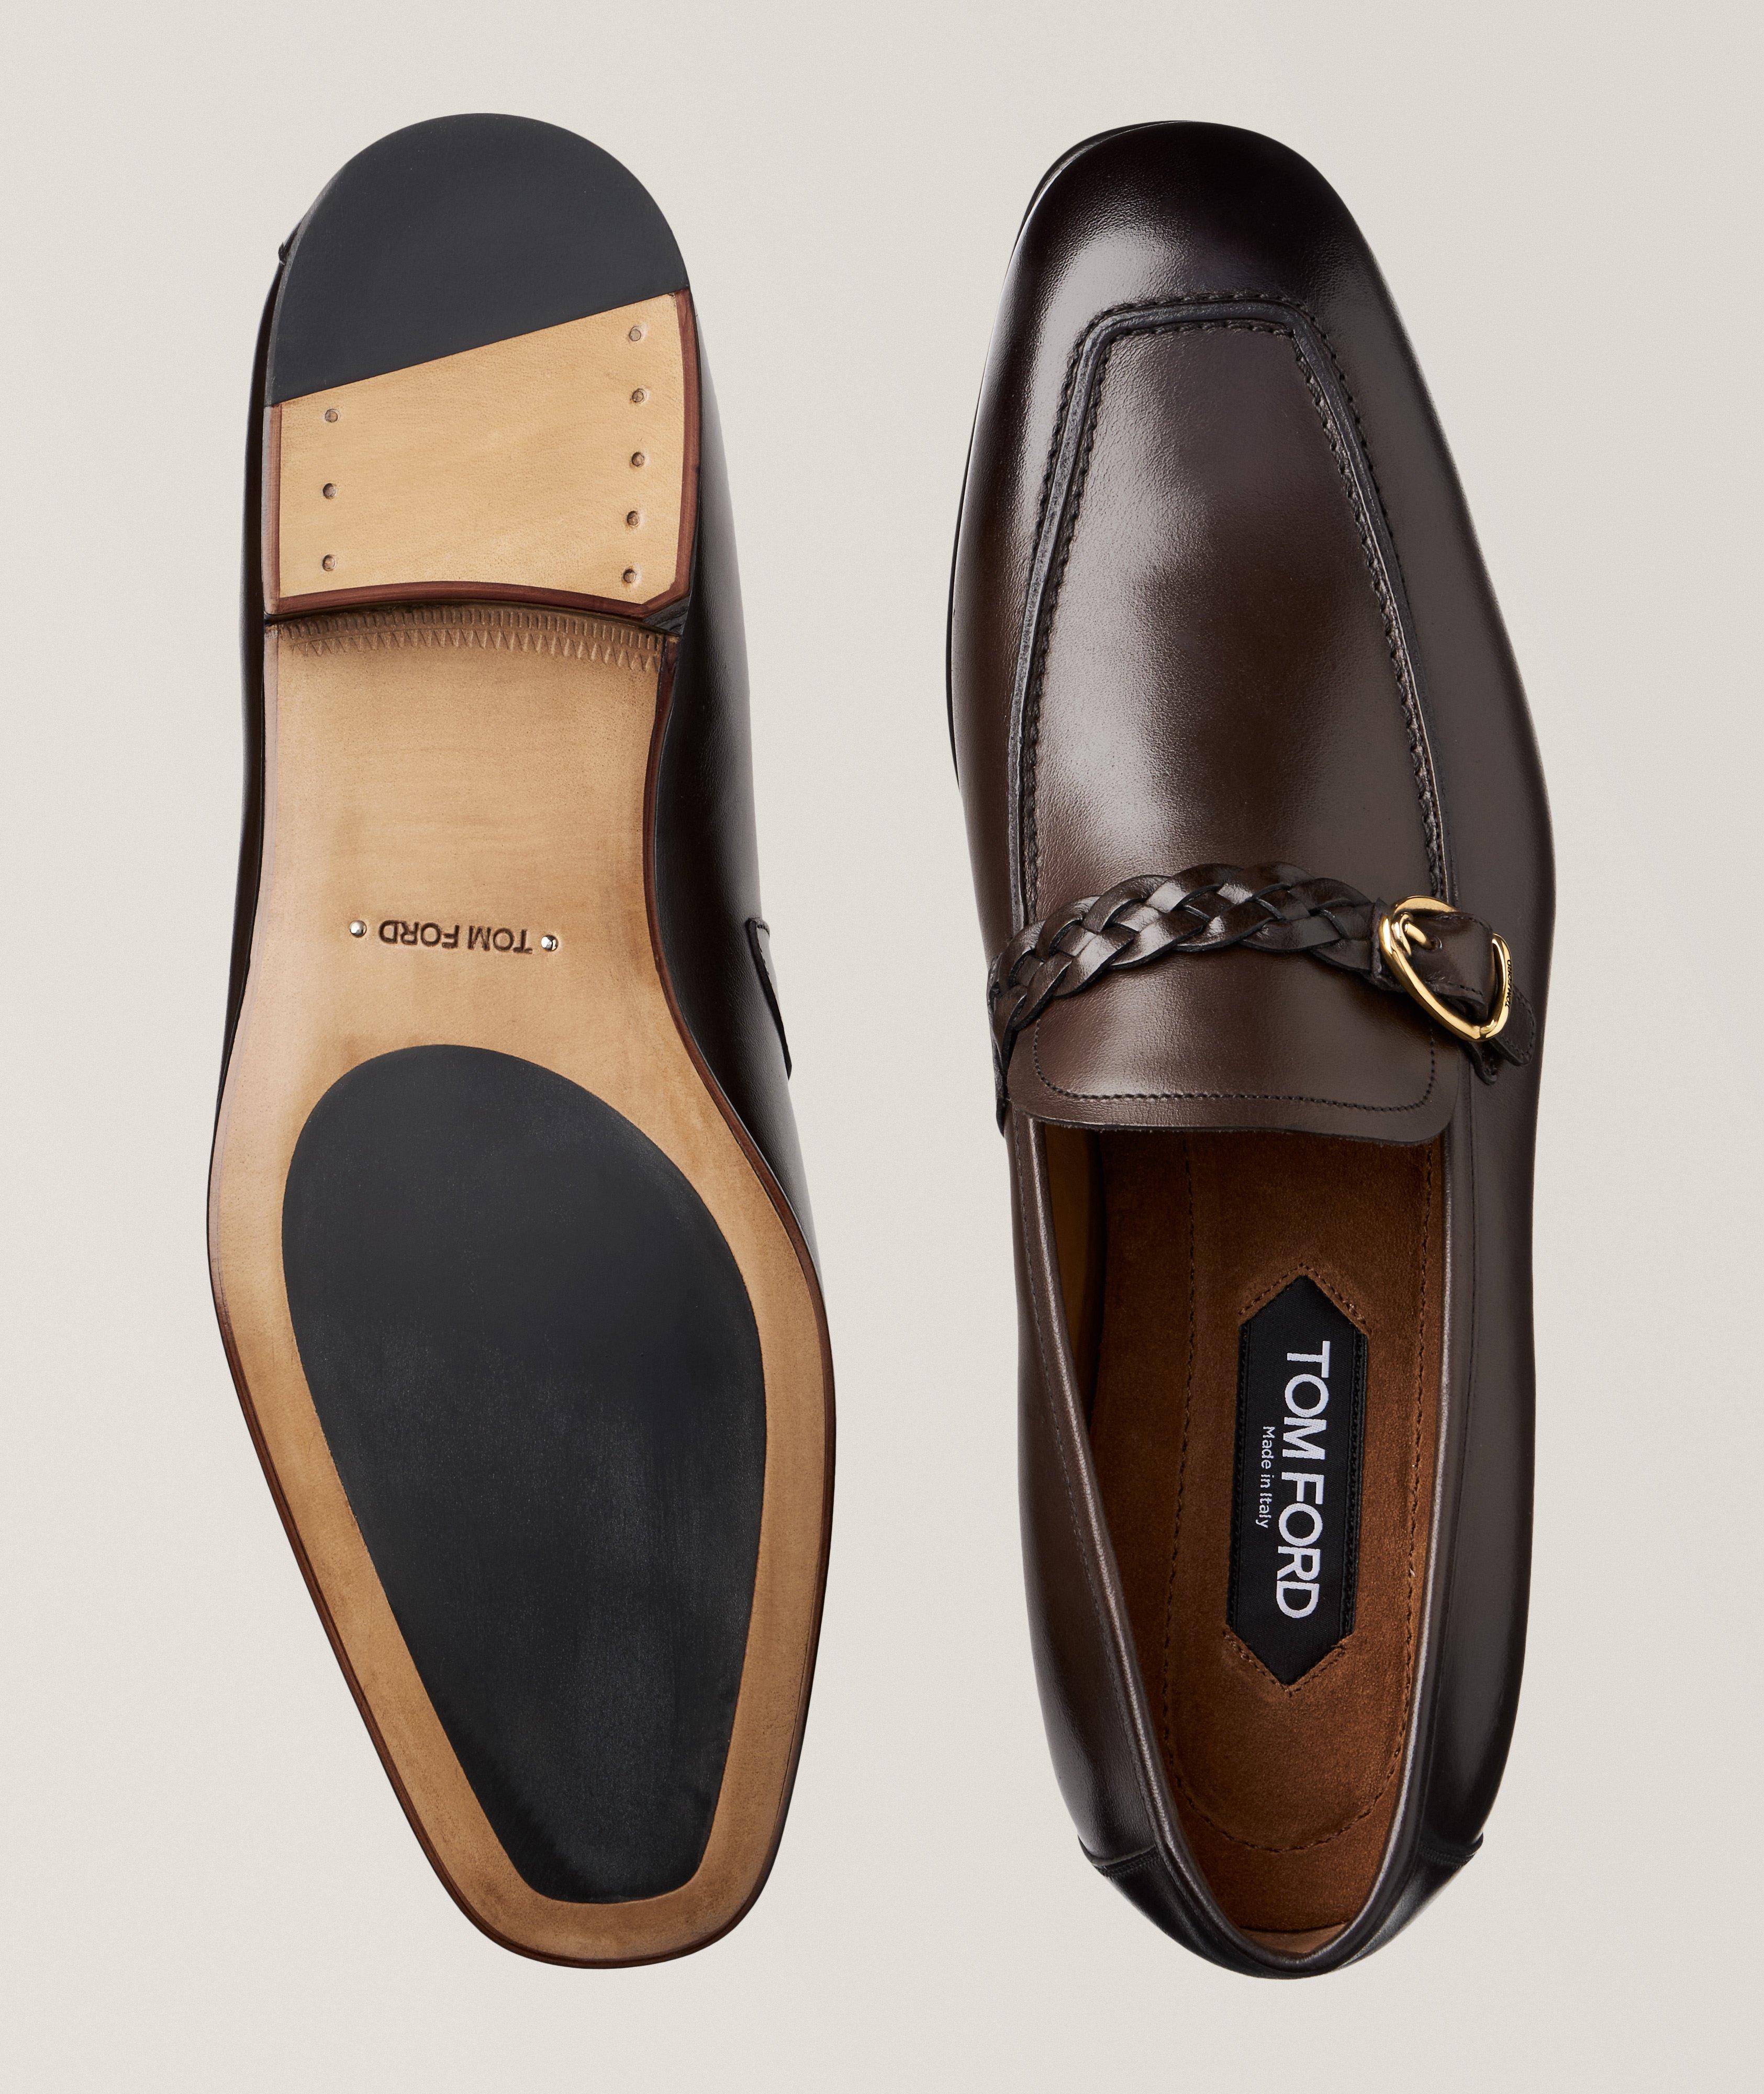 TOM FORD Martin Braided Band Burnished Leather Loafers, Dress Shoes